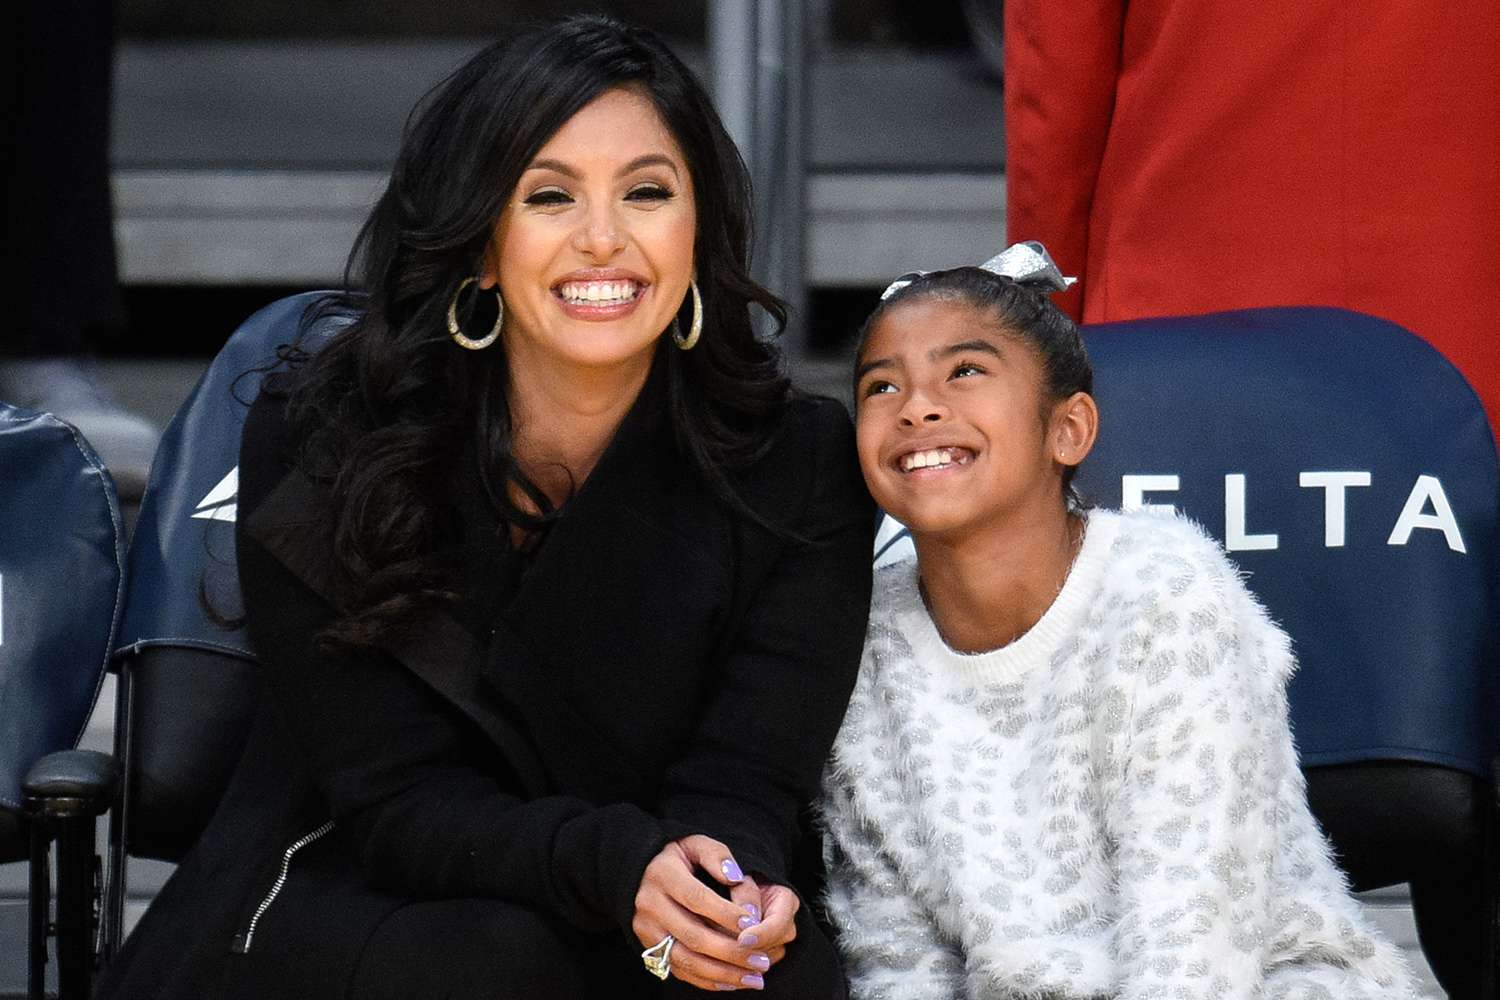 Vanessa Bryant (L) and Gianna Maria-Onore Bryant attend a basketball game between the Indiana Pacers and the Los Angeles Lakers at Staples Center on November 29, 2015 